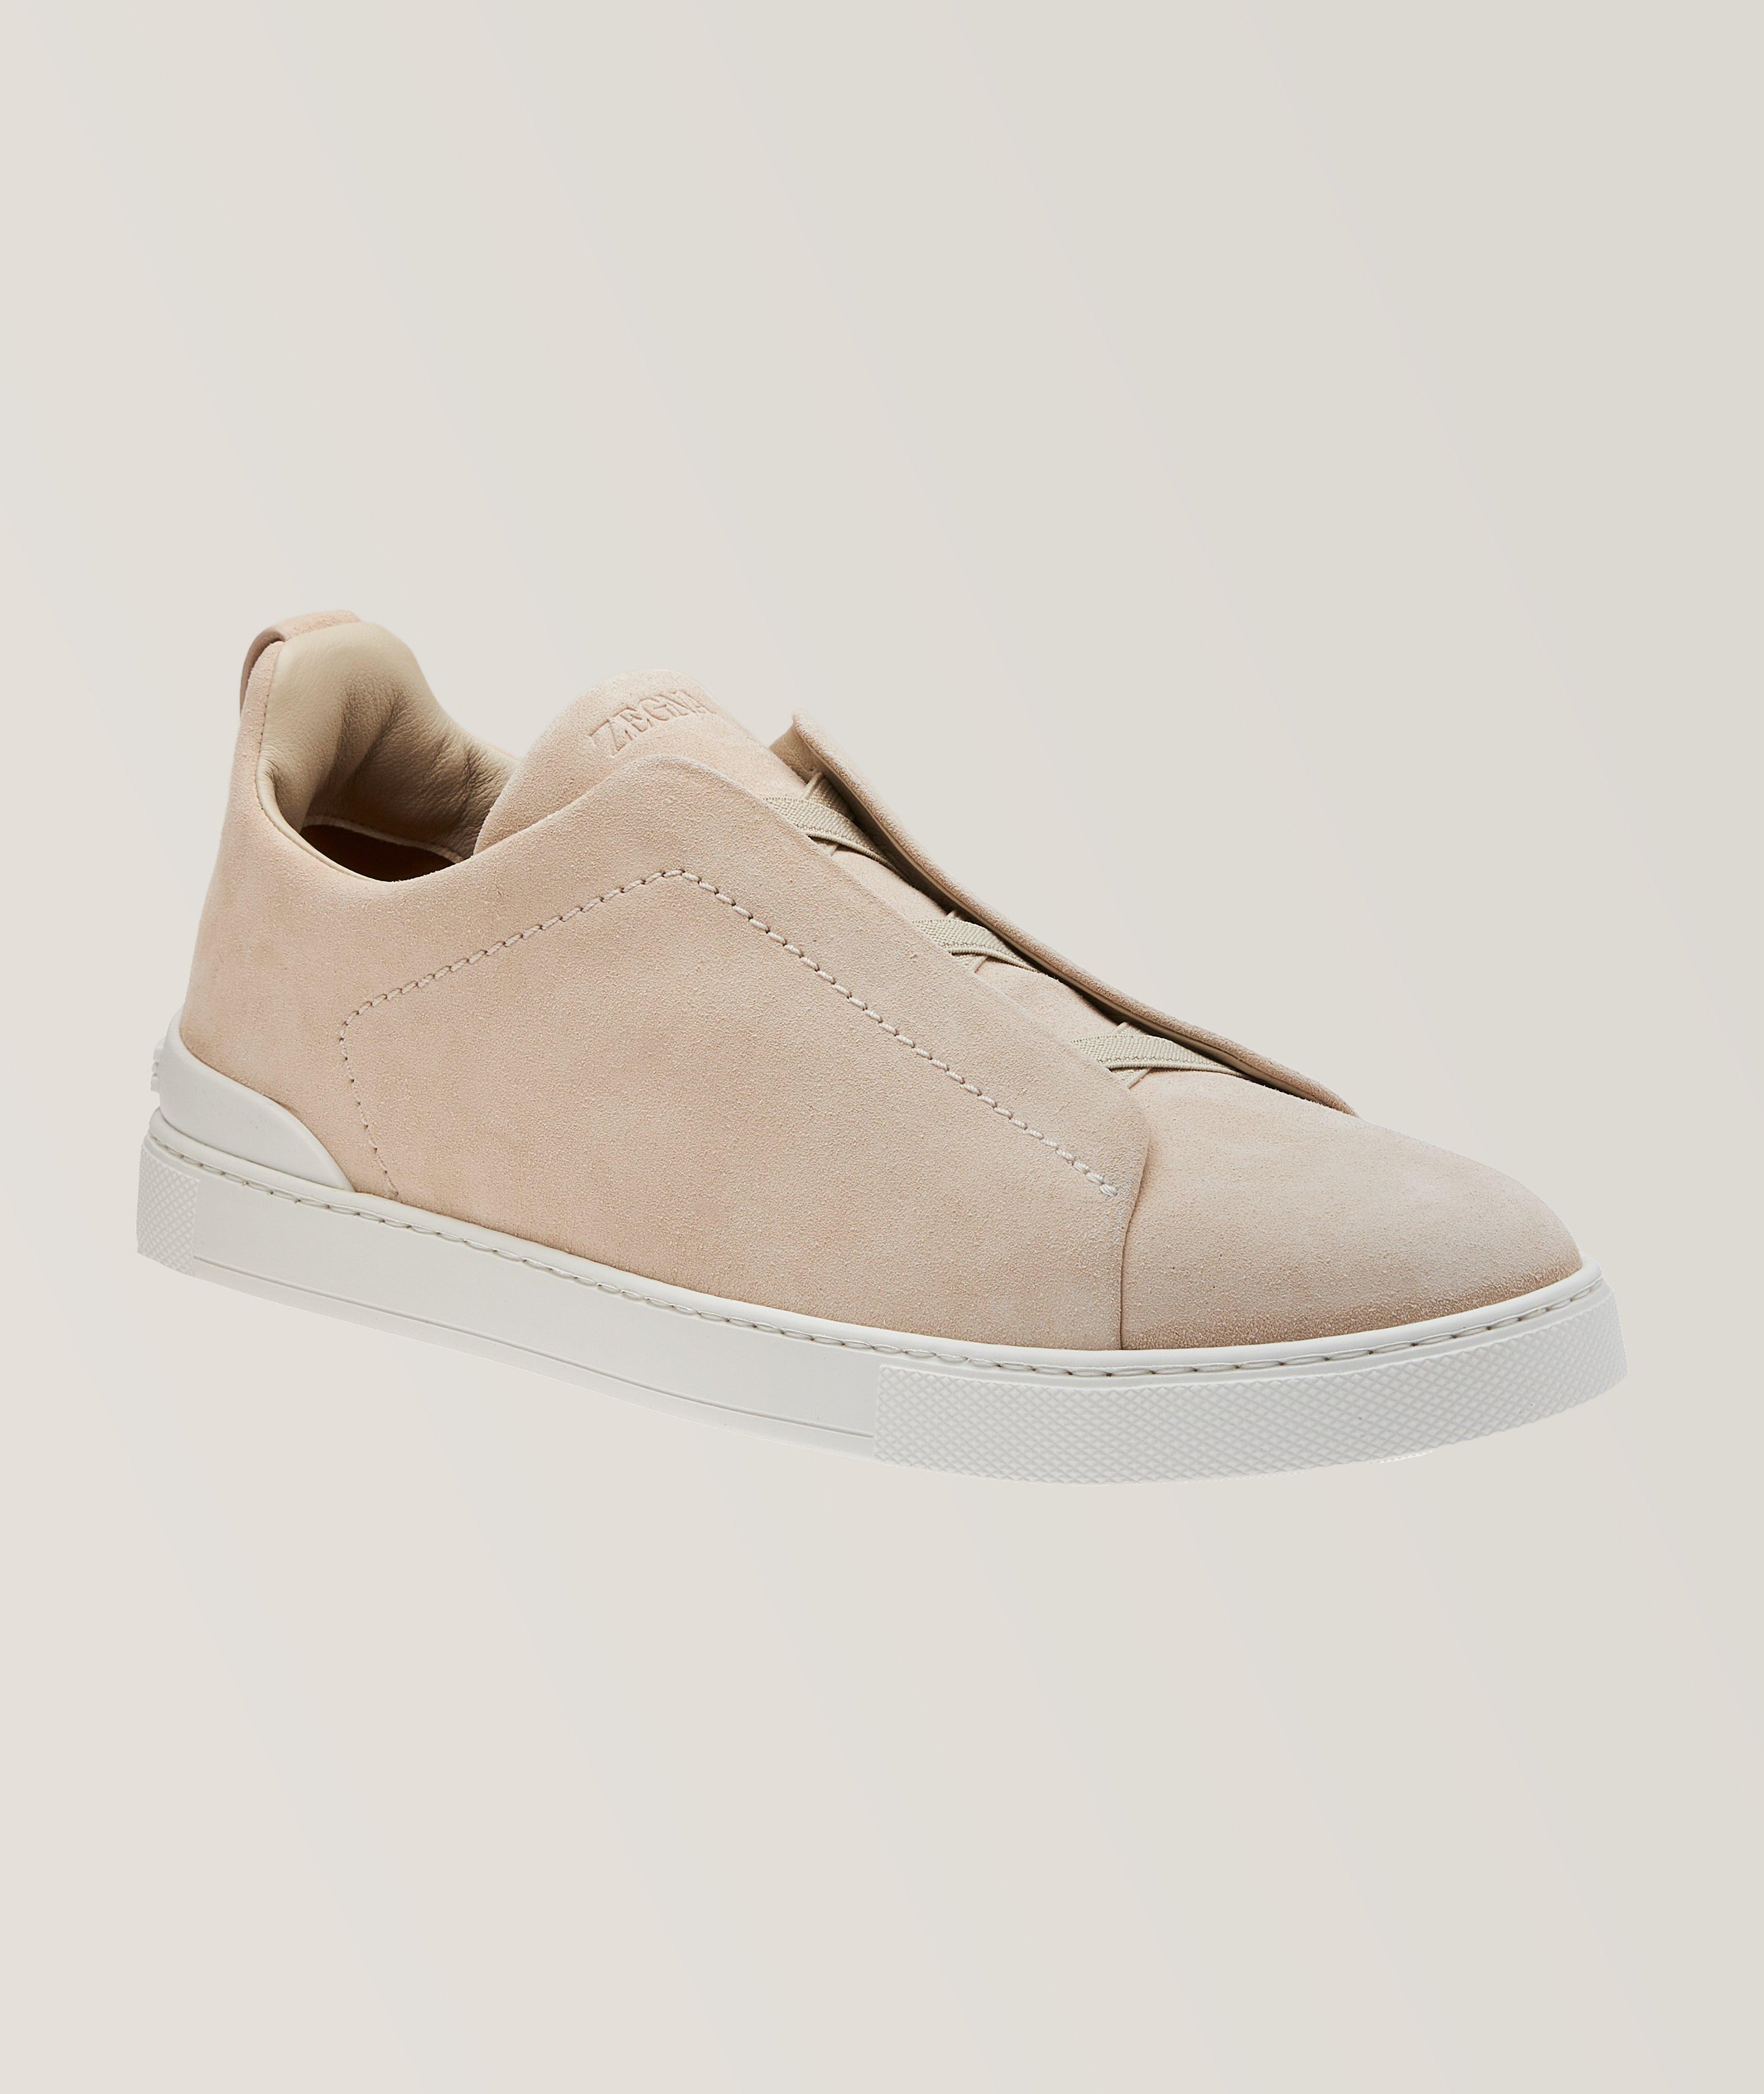 Triple Stitch Tonal Suede Slip-On Sneakers image 0